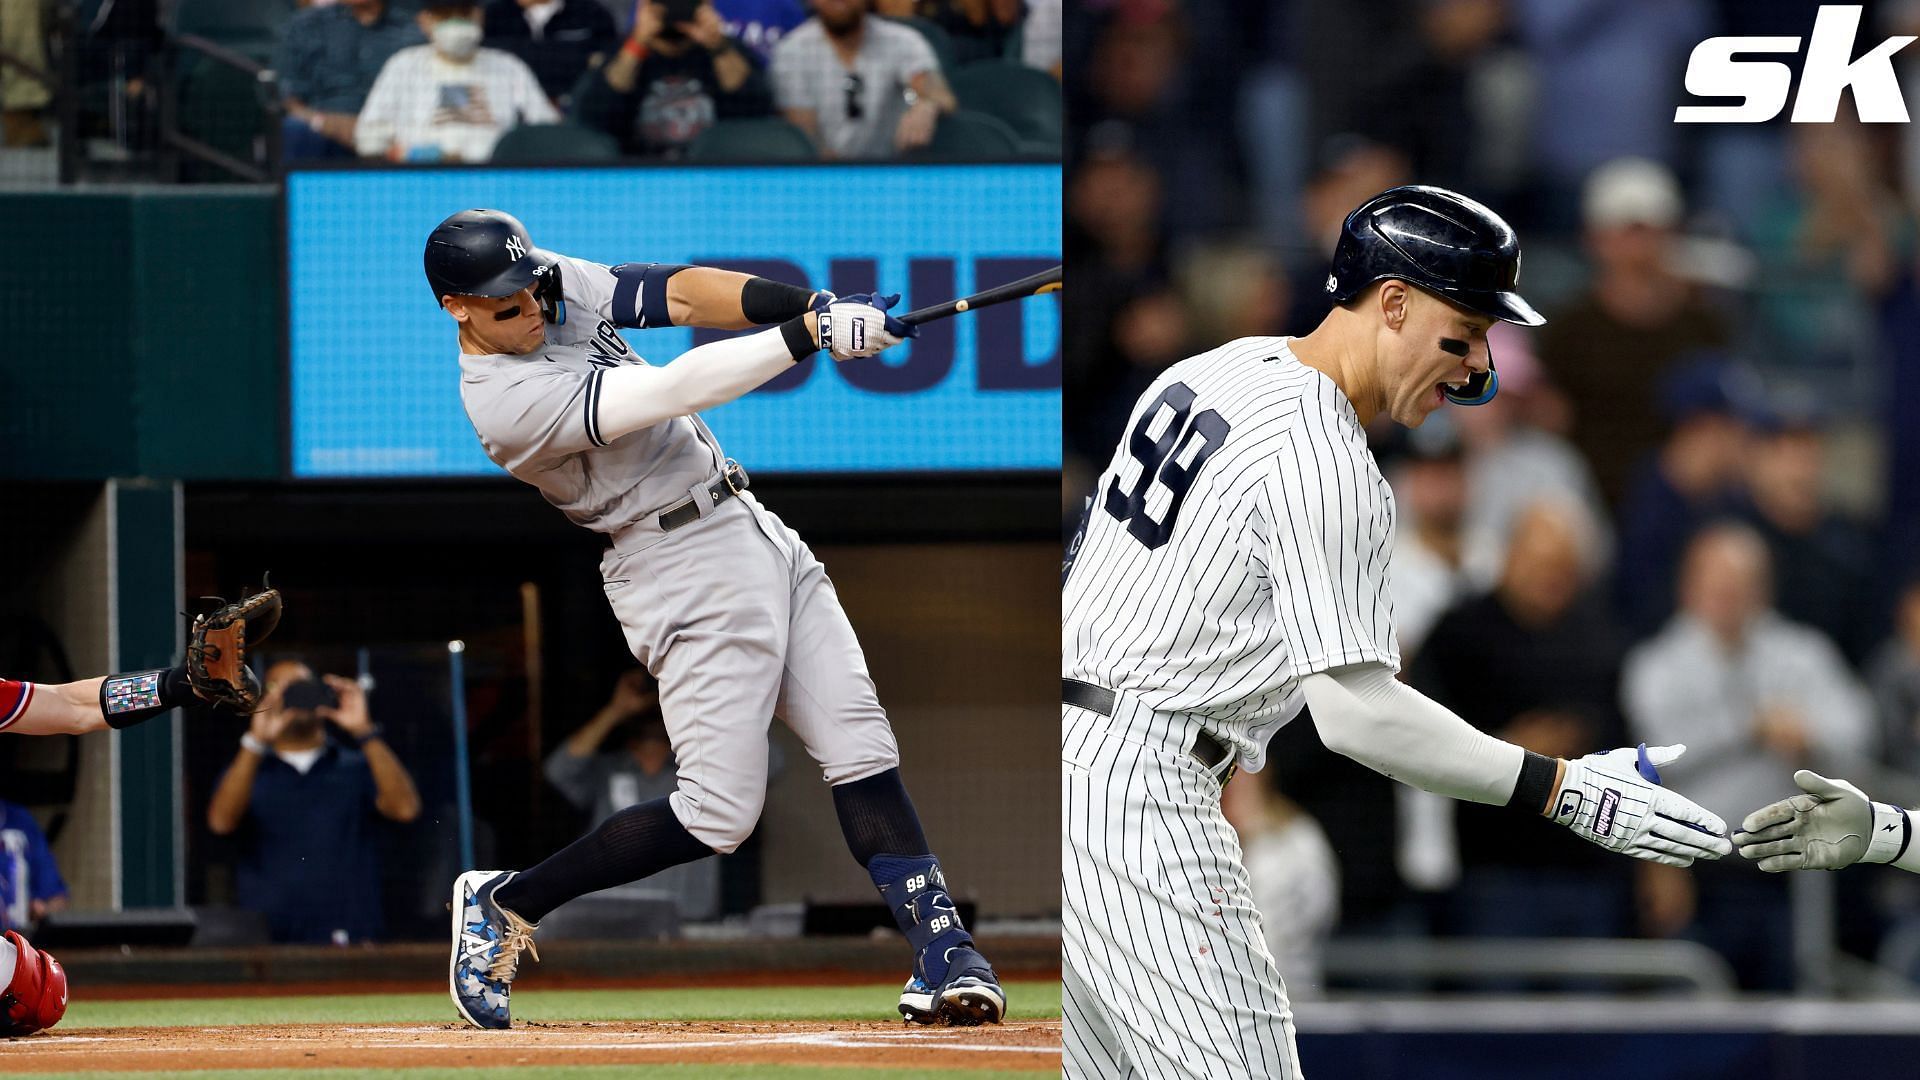 New York Yankees news: How Aaron Judge could lose his home run